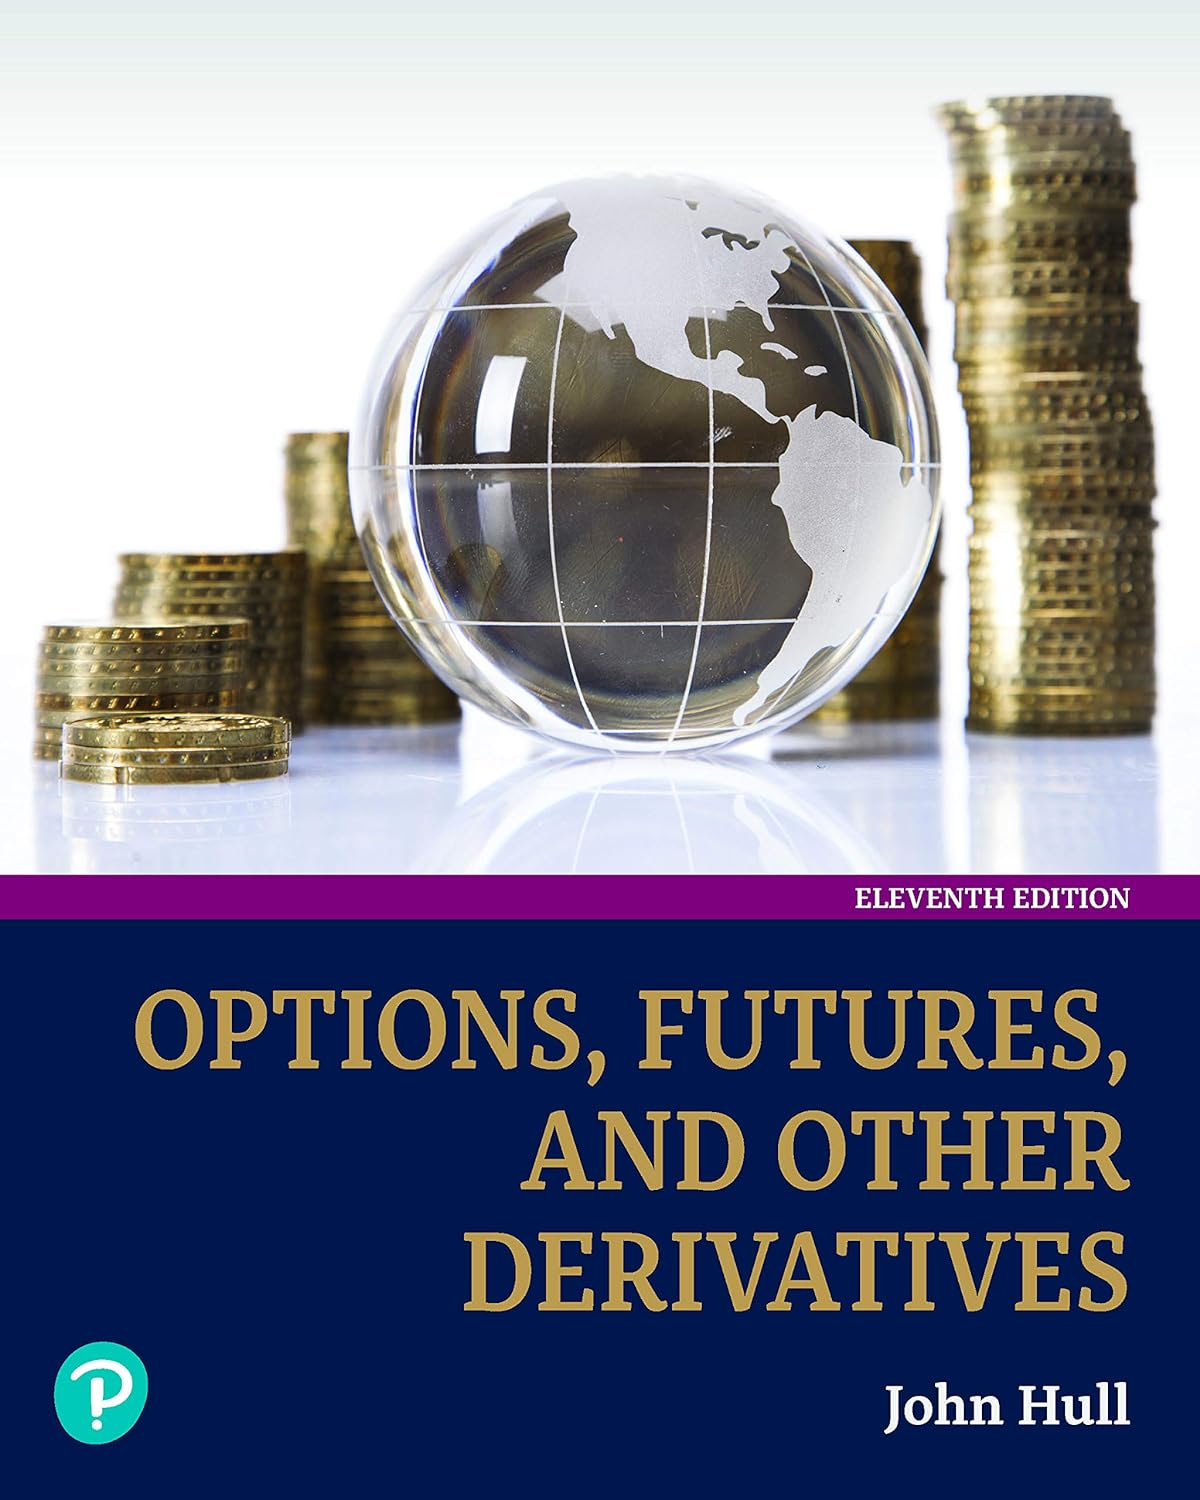 John Hull: Options, Futures, and Other Derivatives 11th Edition (EBook, Pearson)